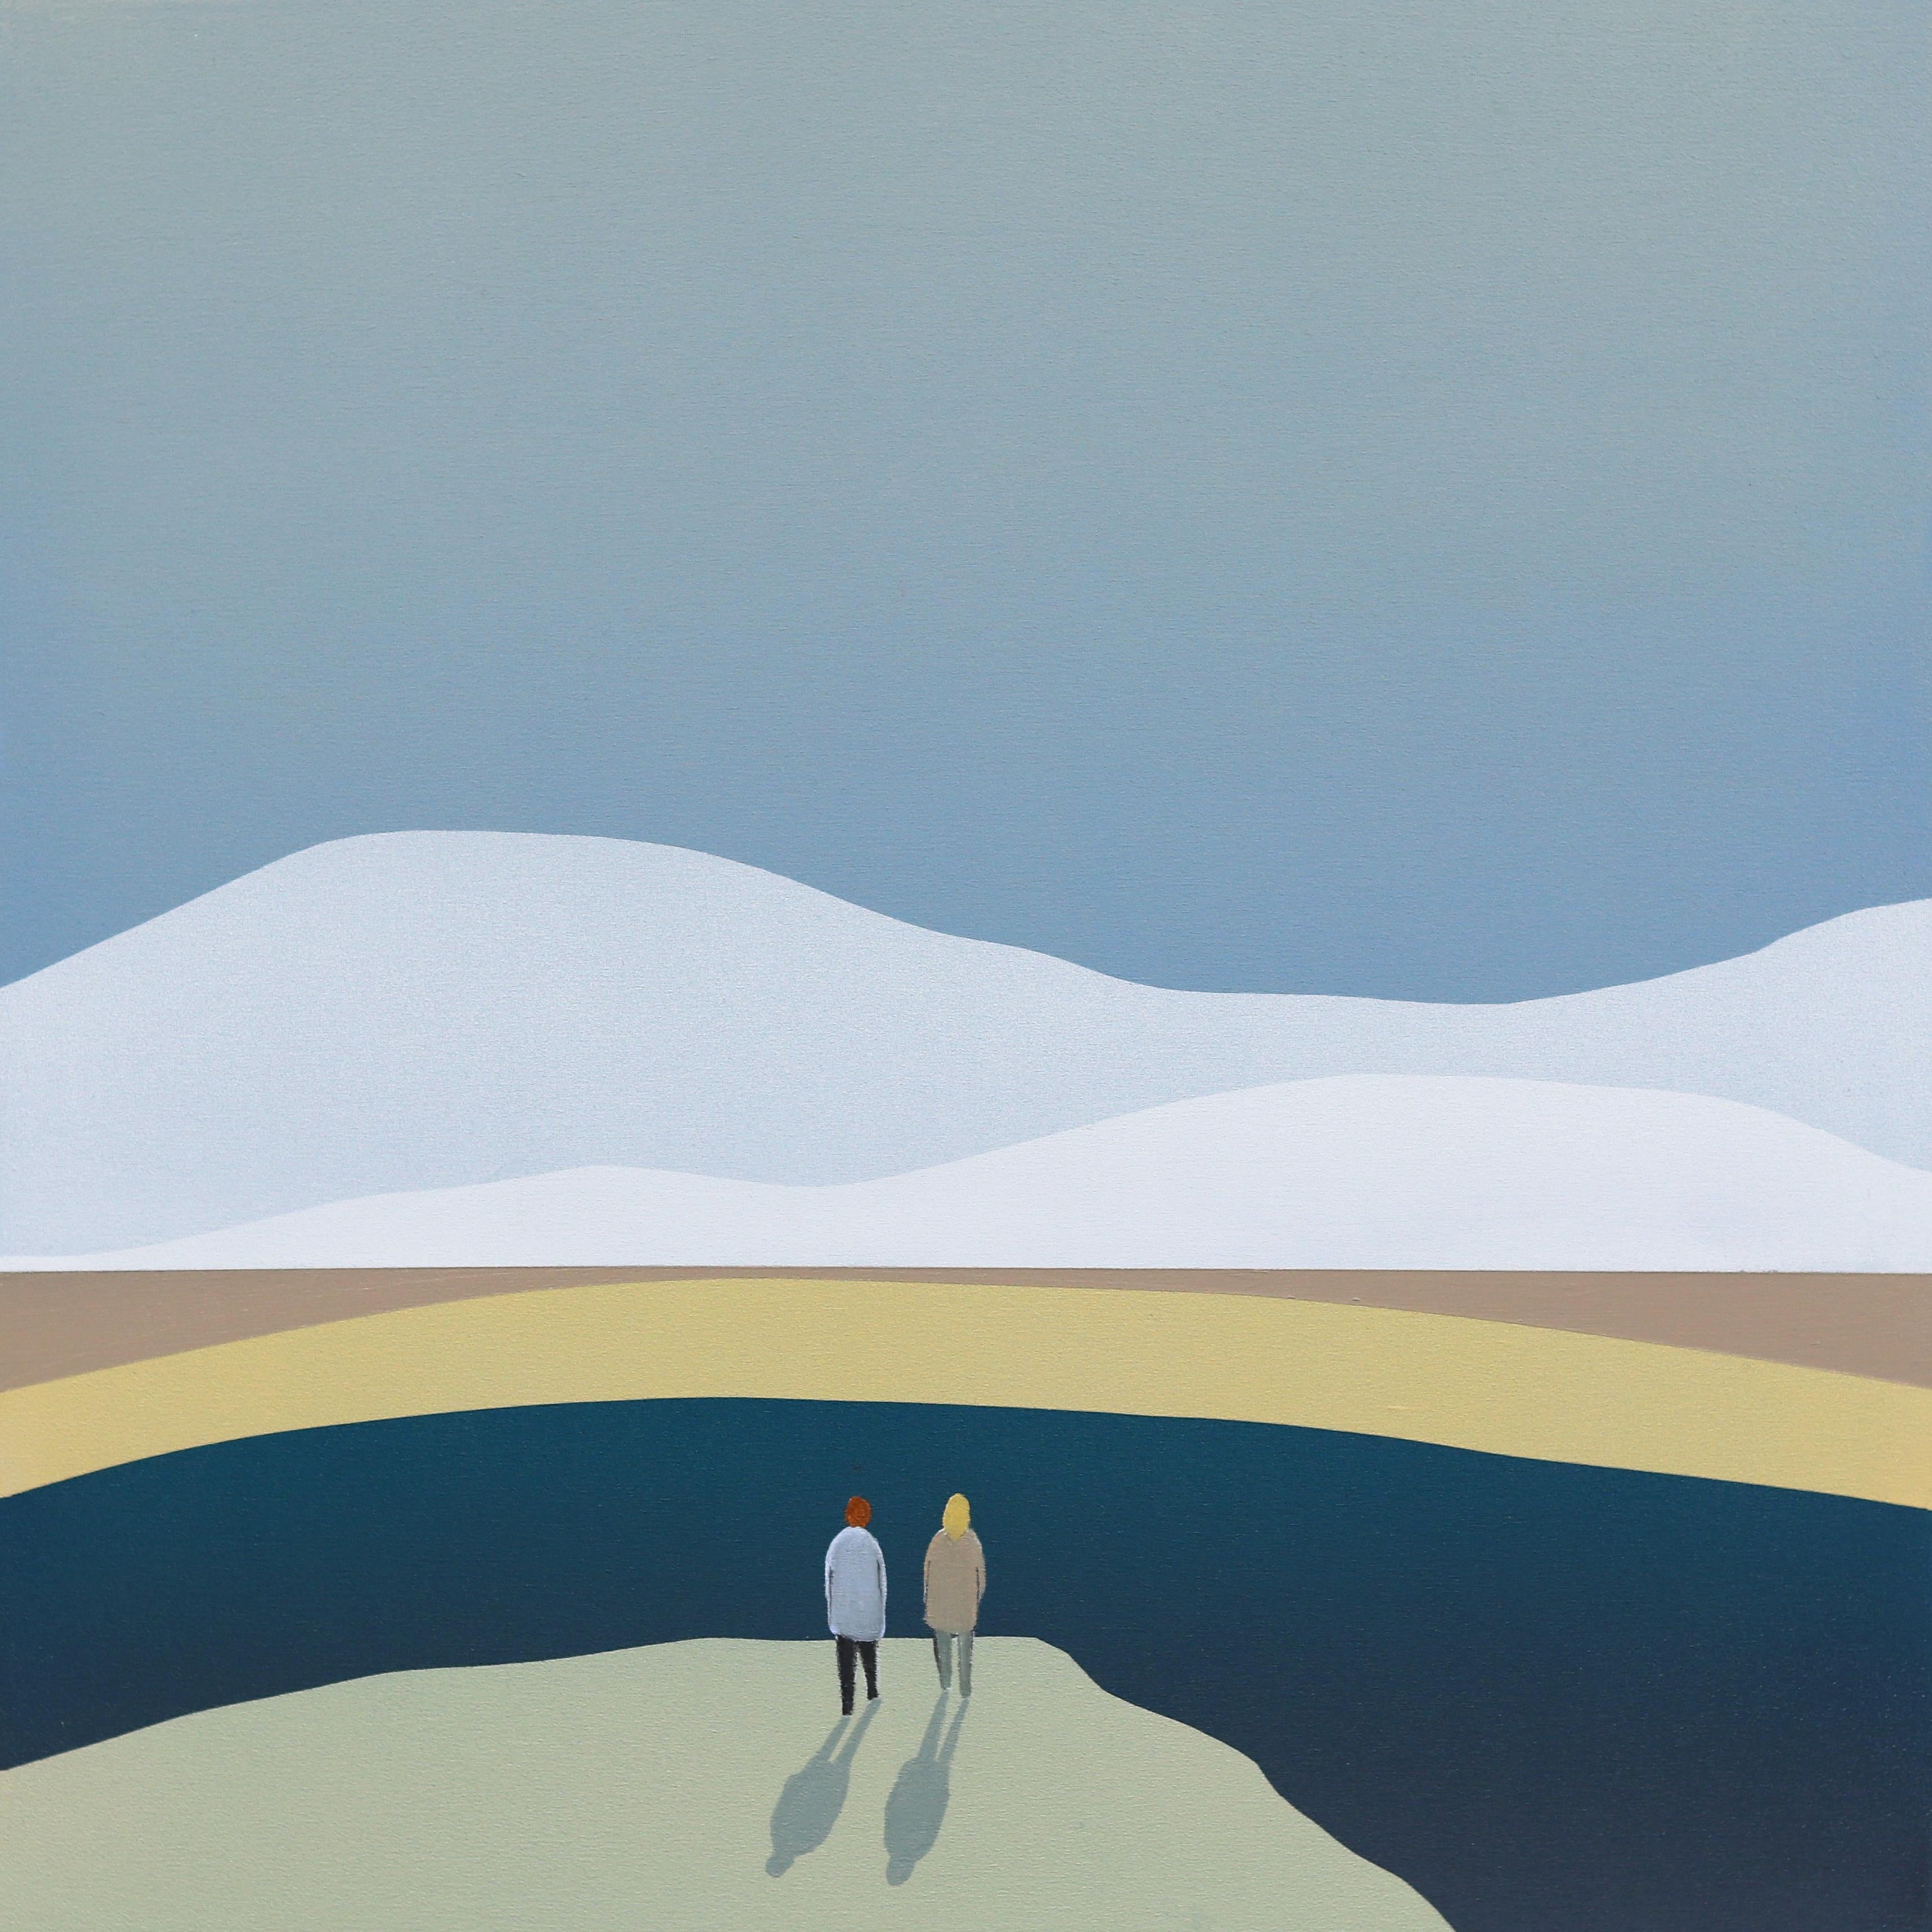 It Will Be Okay - Minimalist Scenic Landscape Painting - Mixed Media Art by Mike Gough